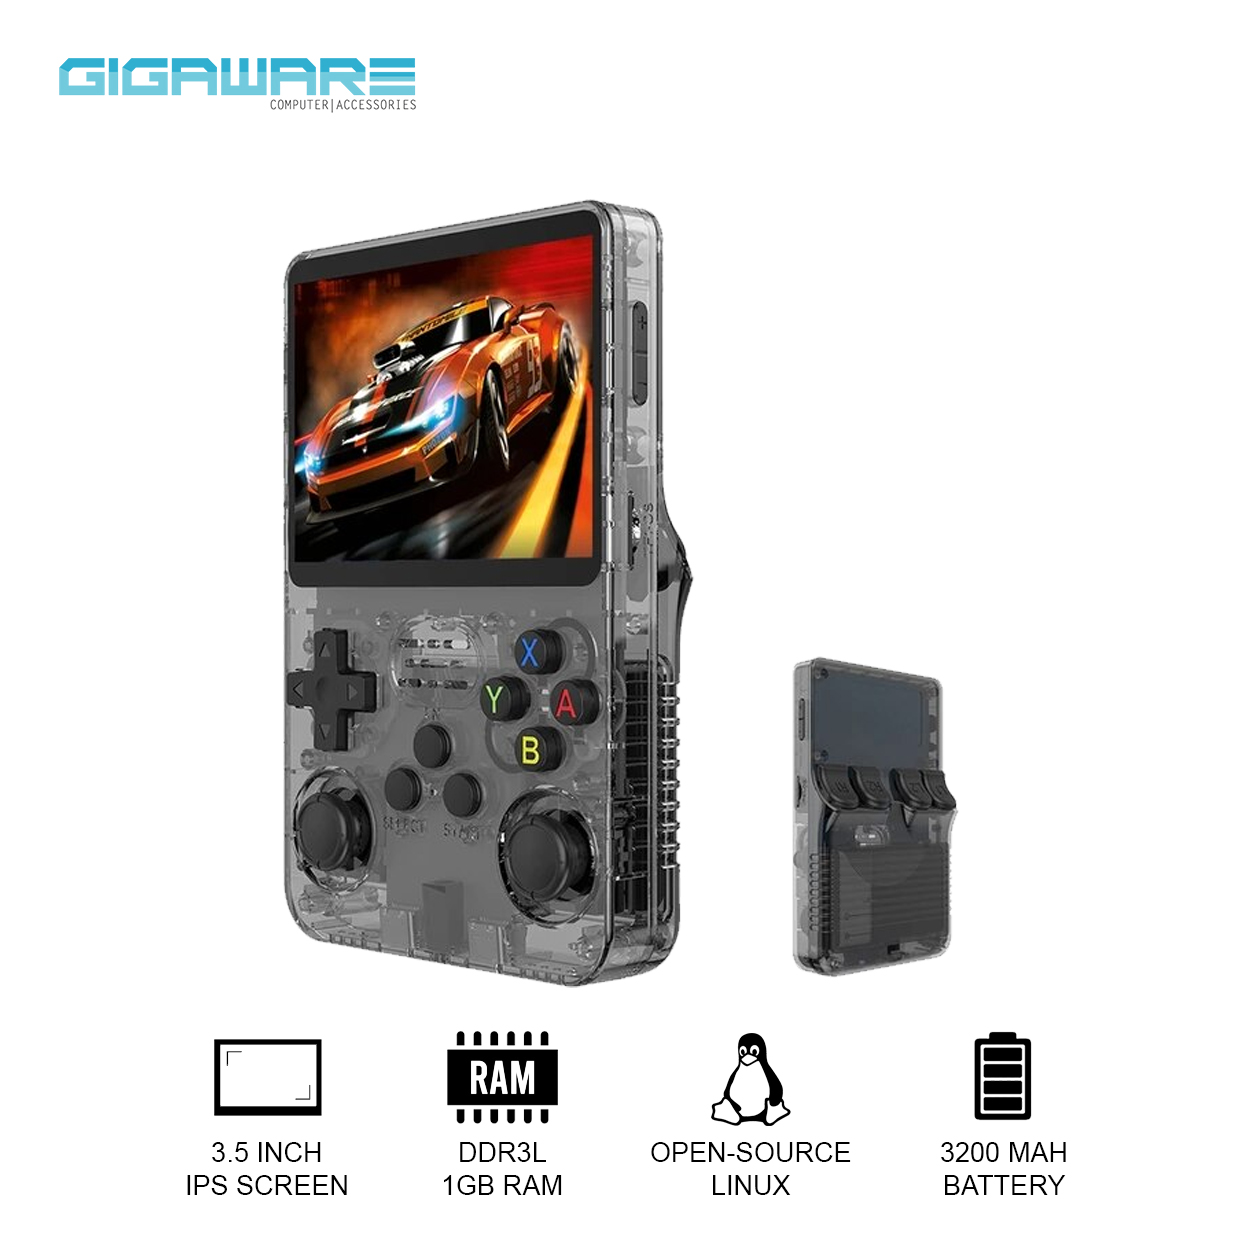 R36S Retro Handheld Video Game Console Linux System 3.5 Inch IPS Screen  R35s Pro Portable Pocket Video Player 64GB Games